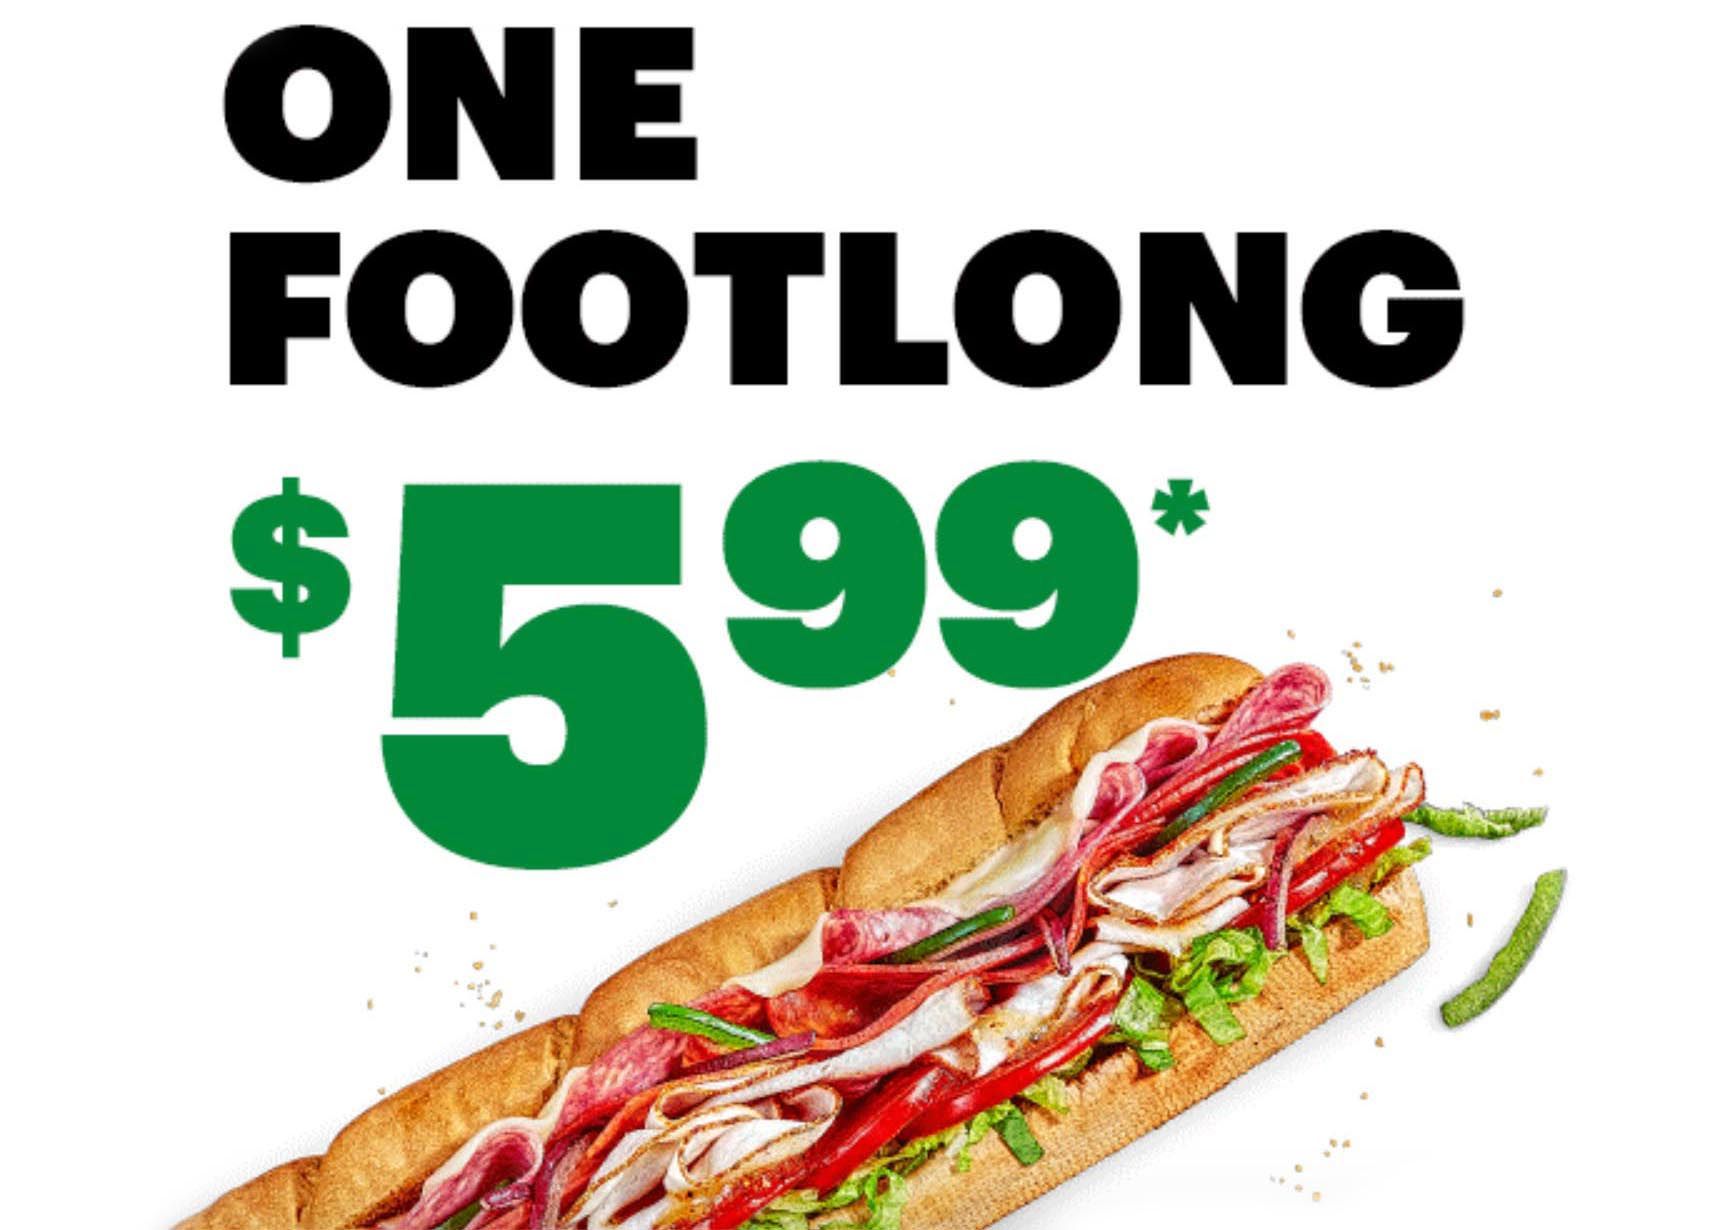 MyWay Rewards Members Can Get a $5.99 Footlong to Celebrate Footlong Friday with an Online or In-app Subway Order